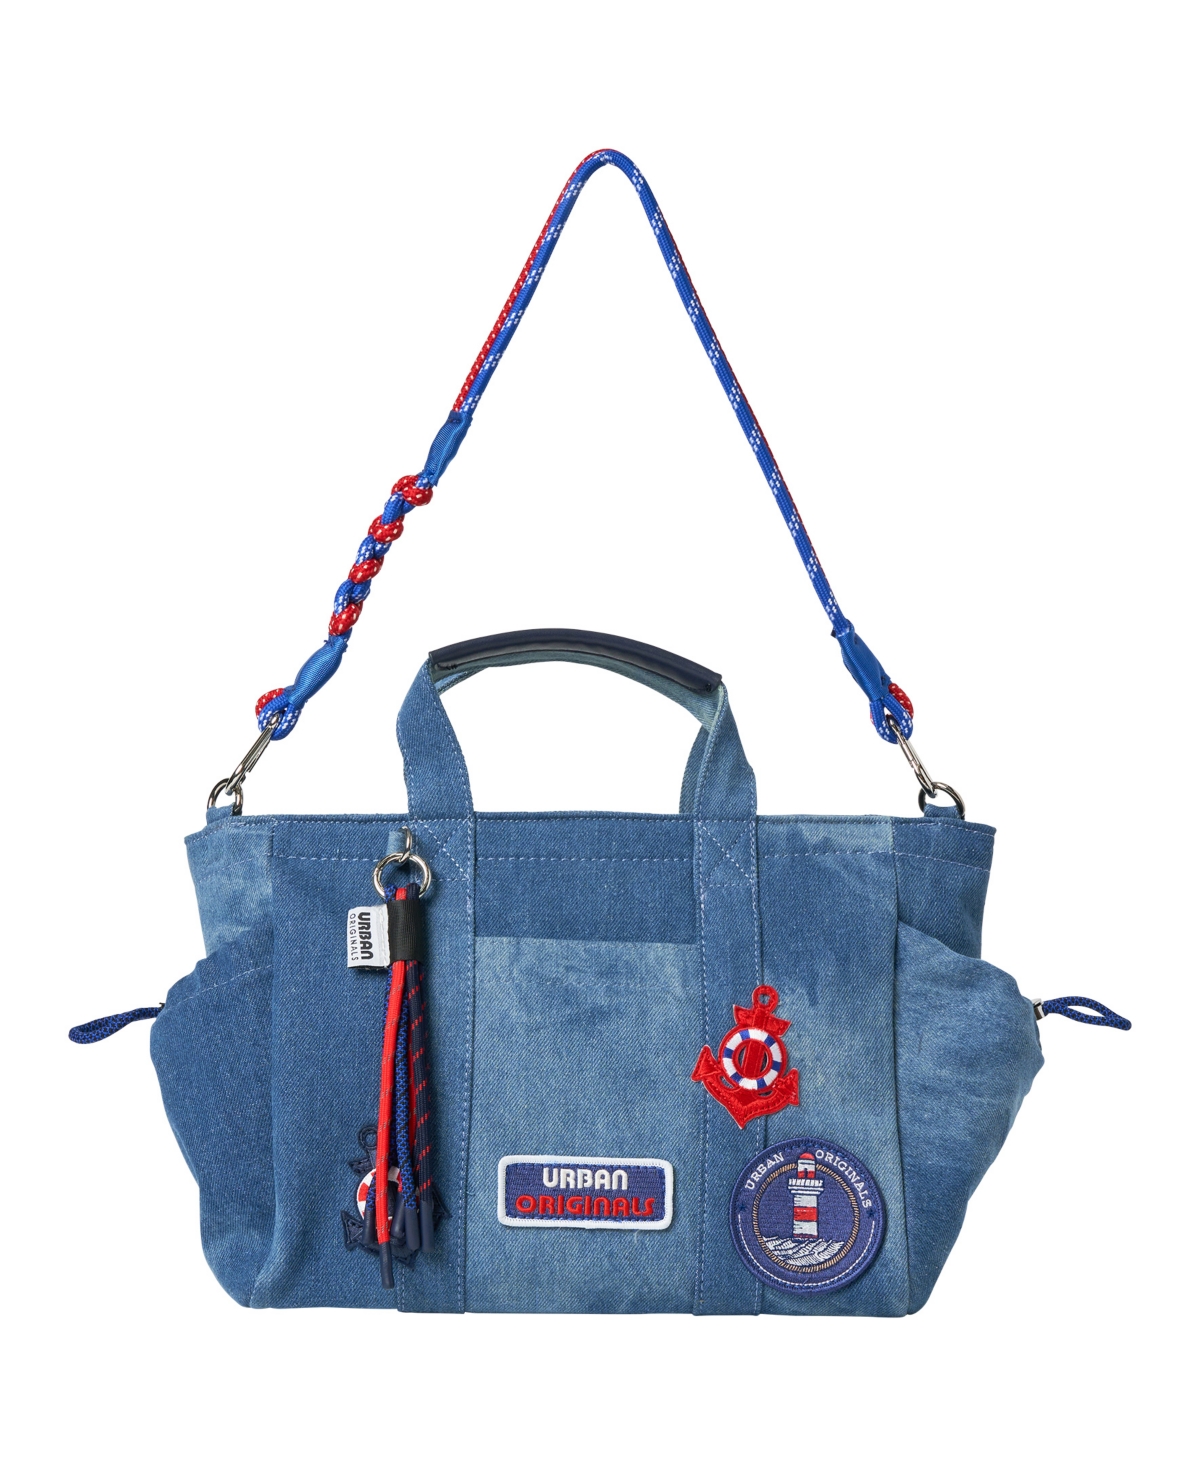 Urban Originals Butterfly Small Tote Bag In Navy